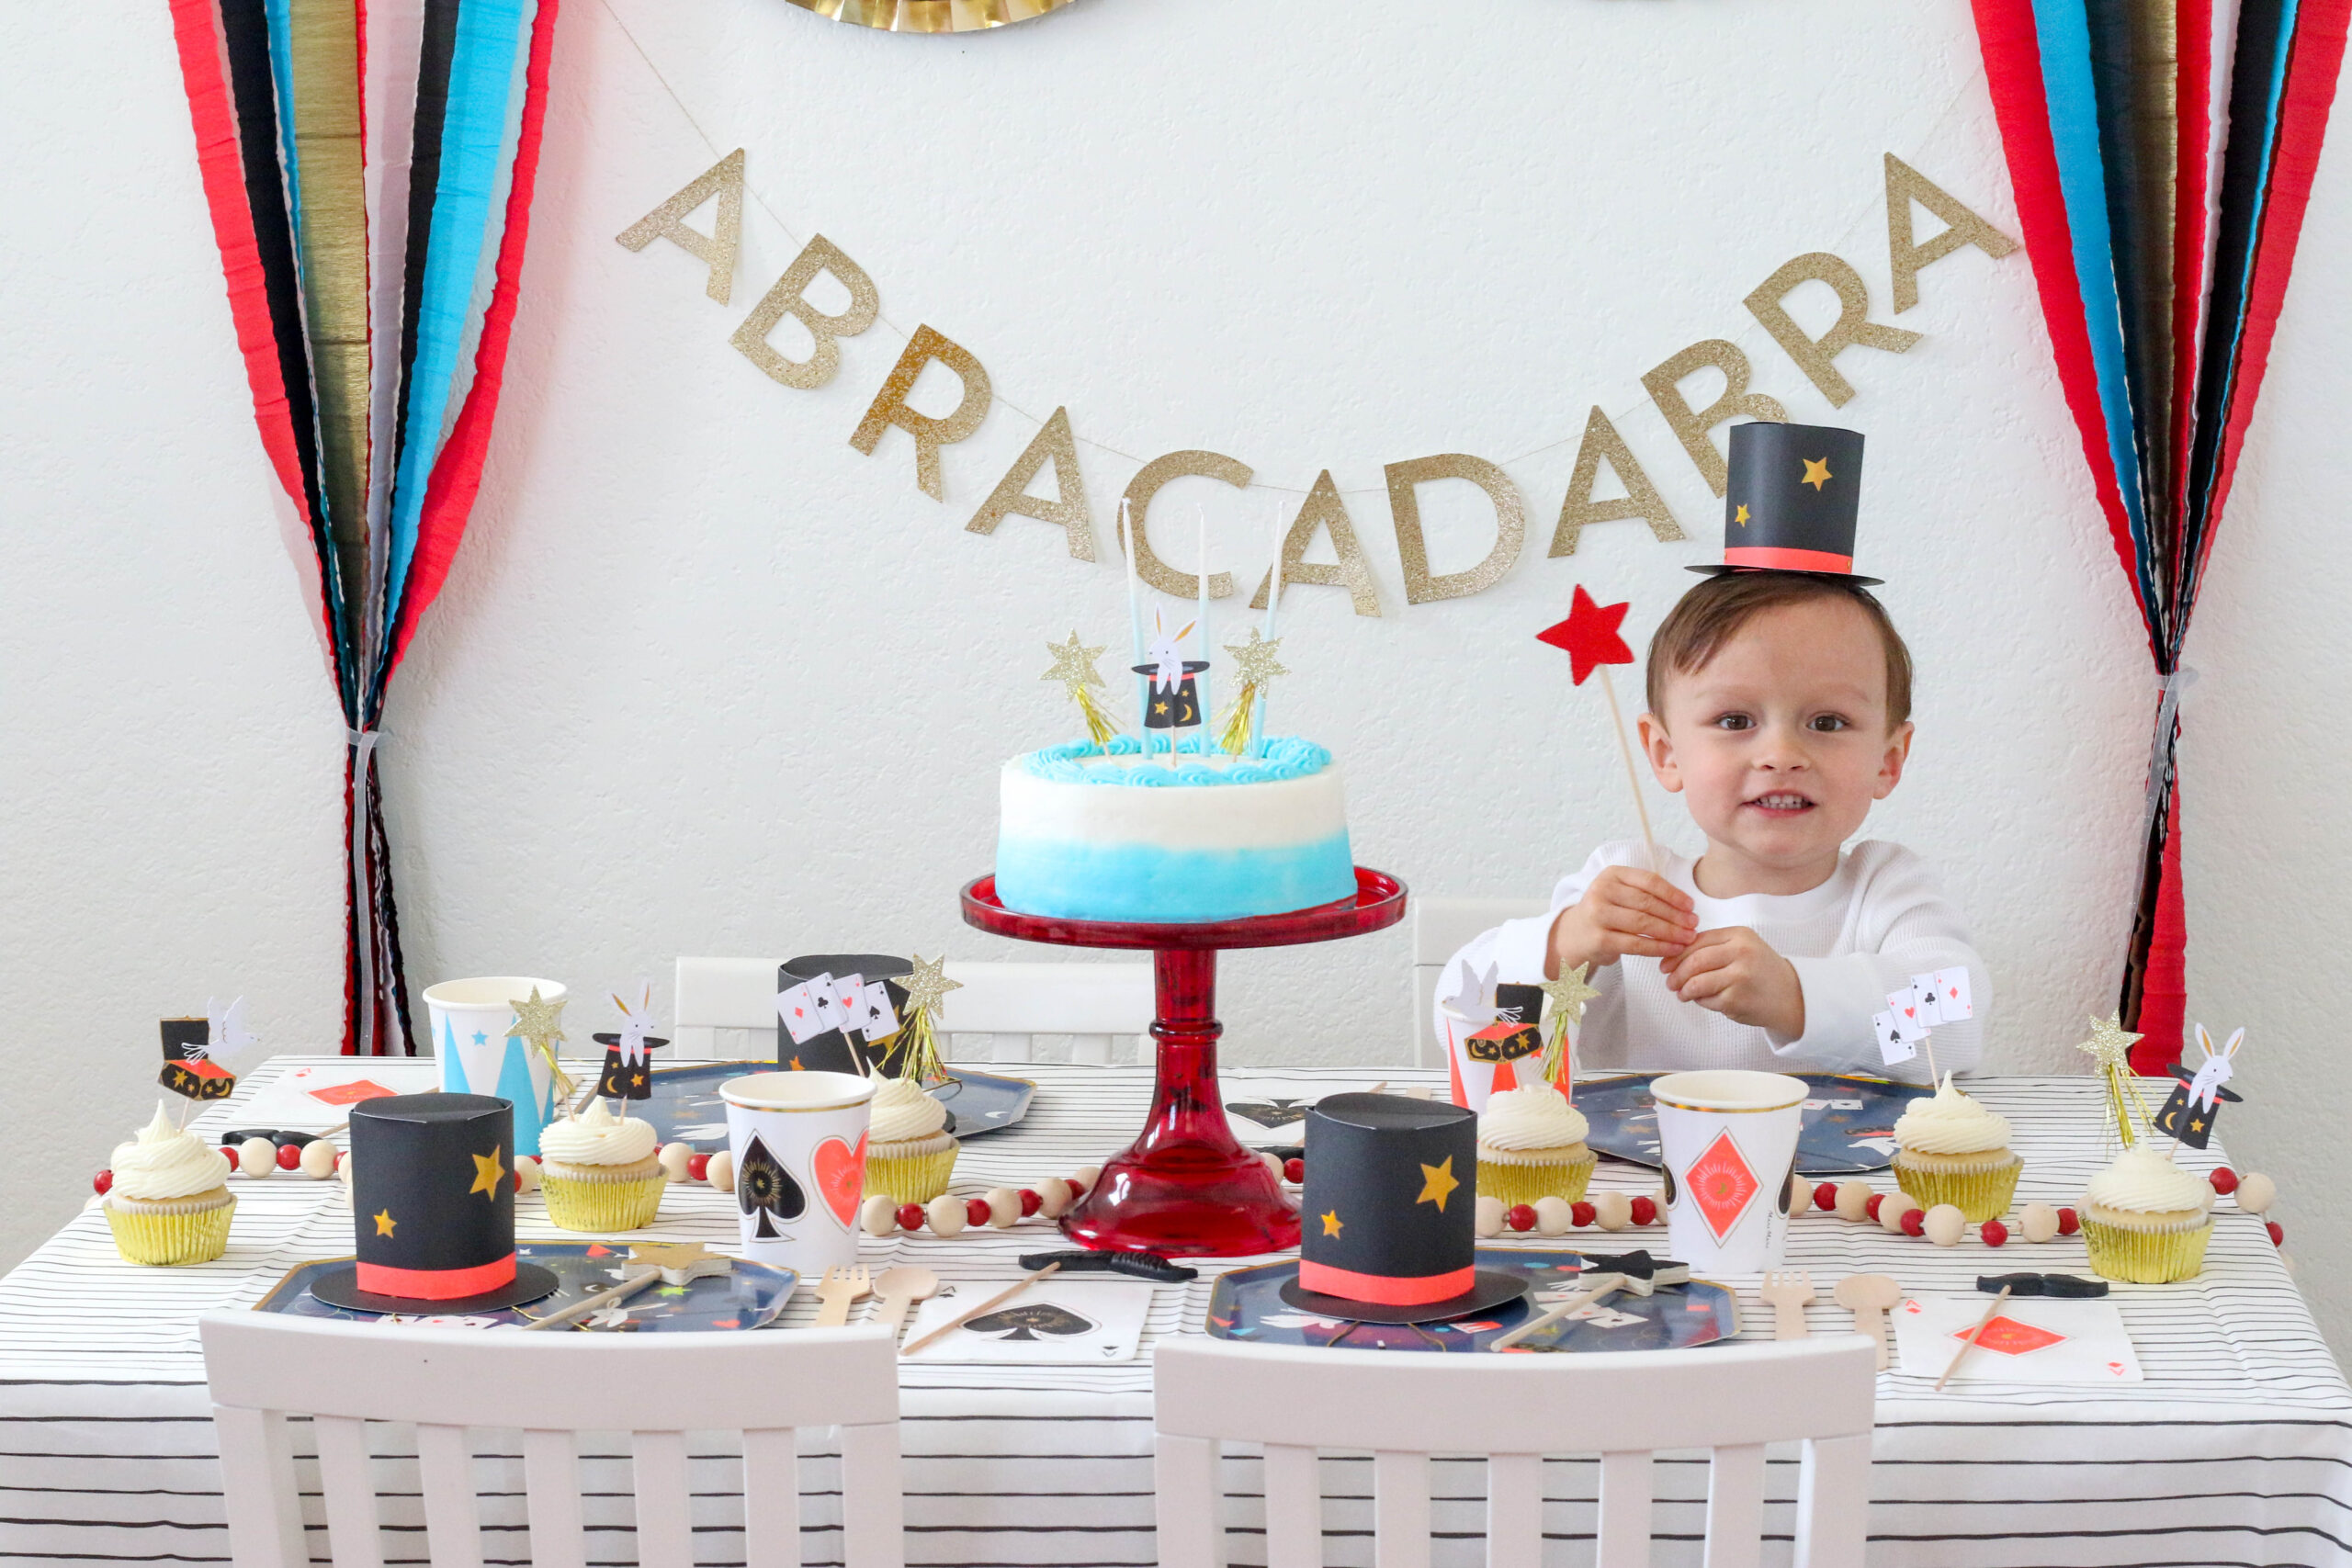 21 Fun Ideas for Food for a Kids' Birthday Party at Home – Instacart